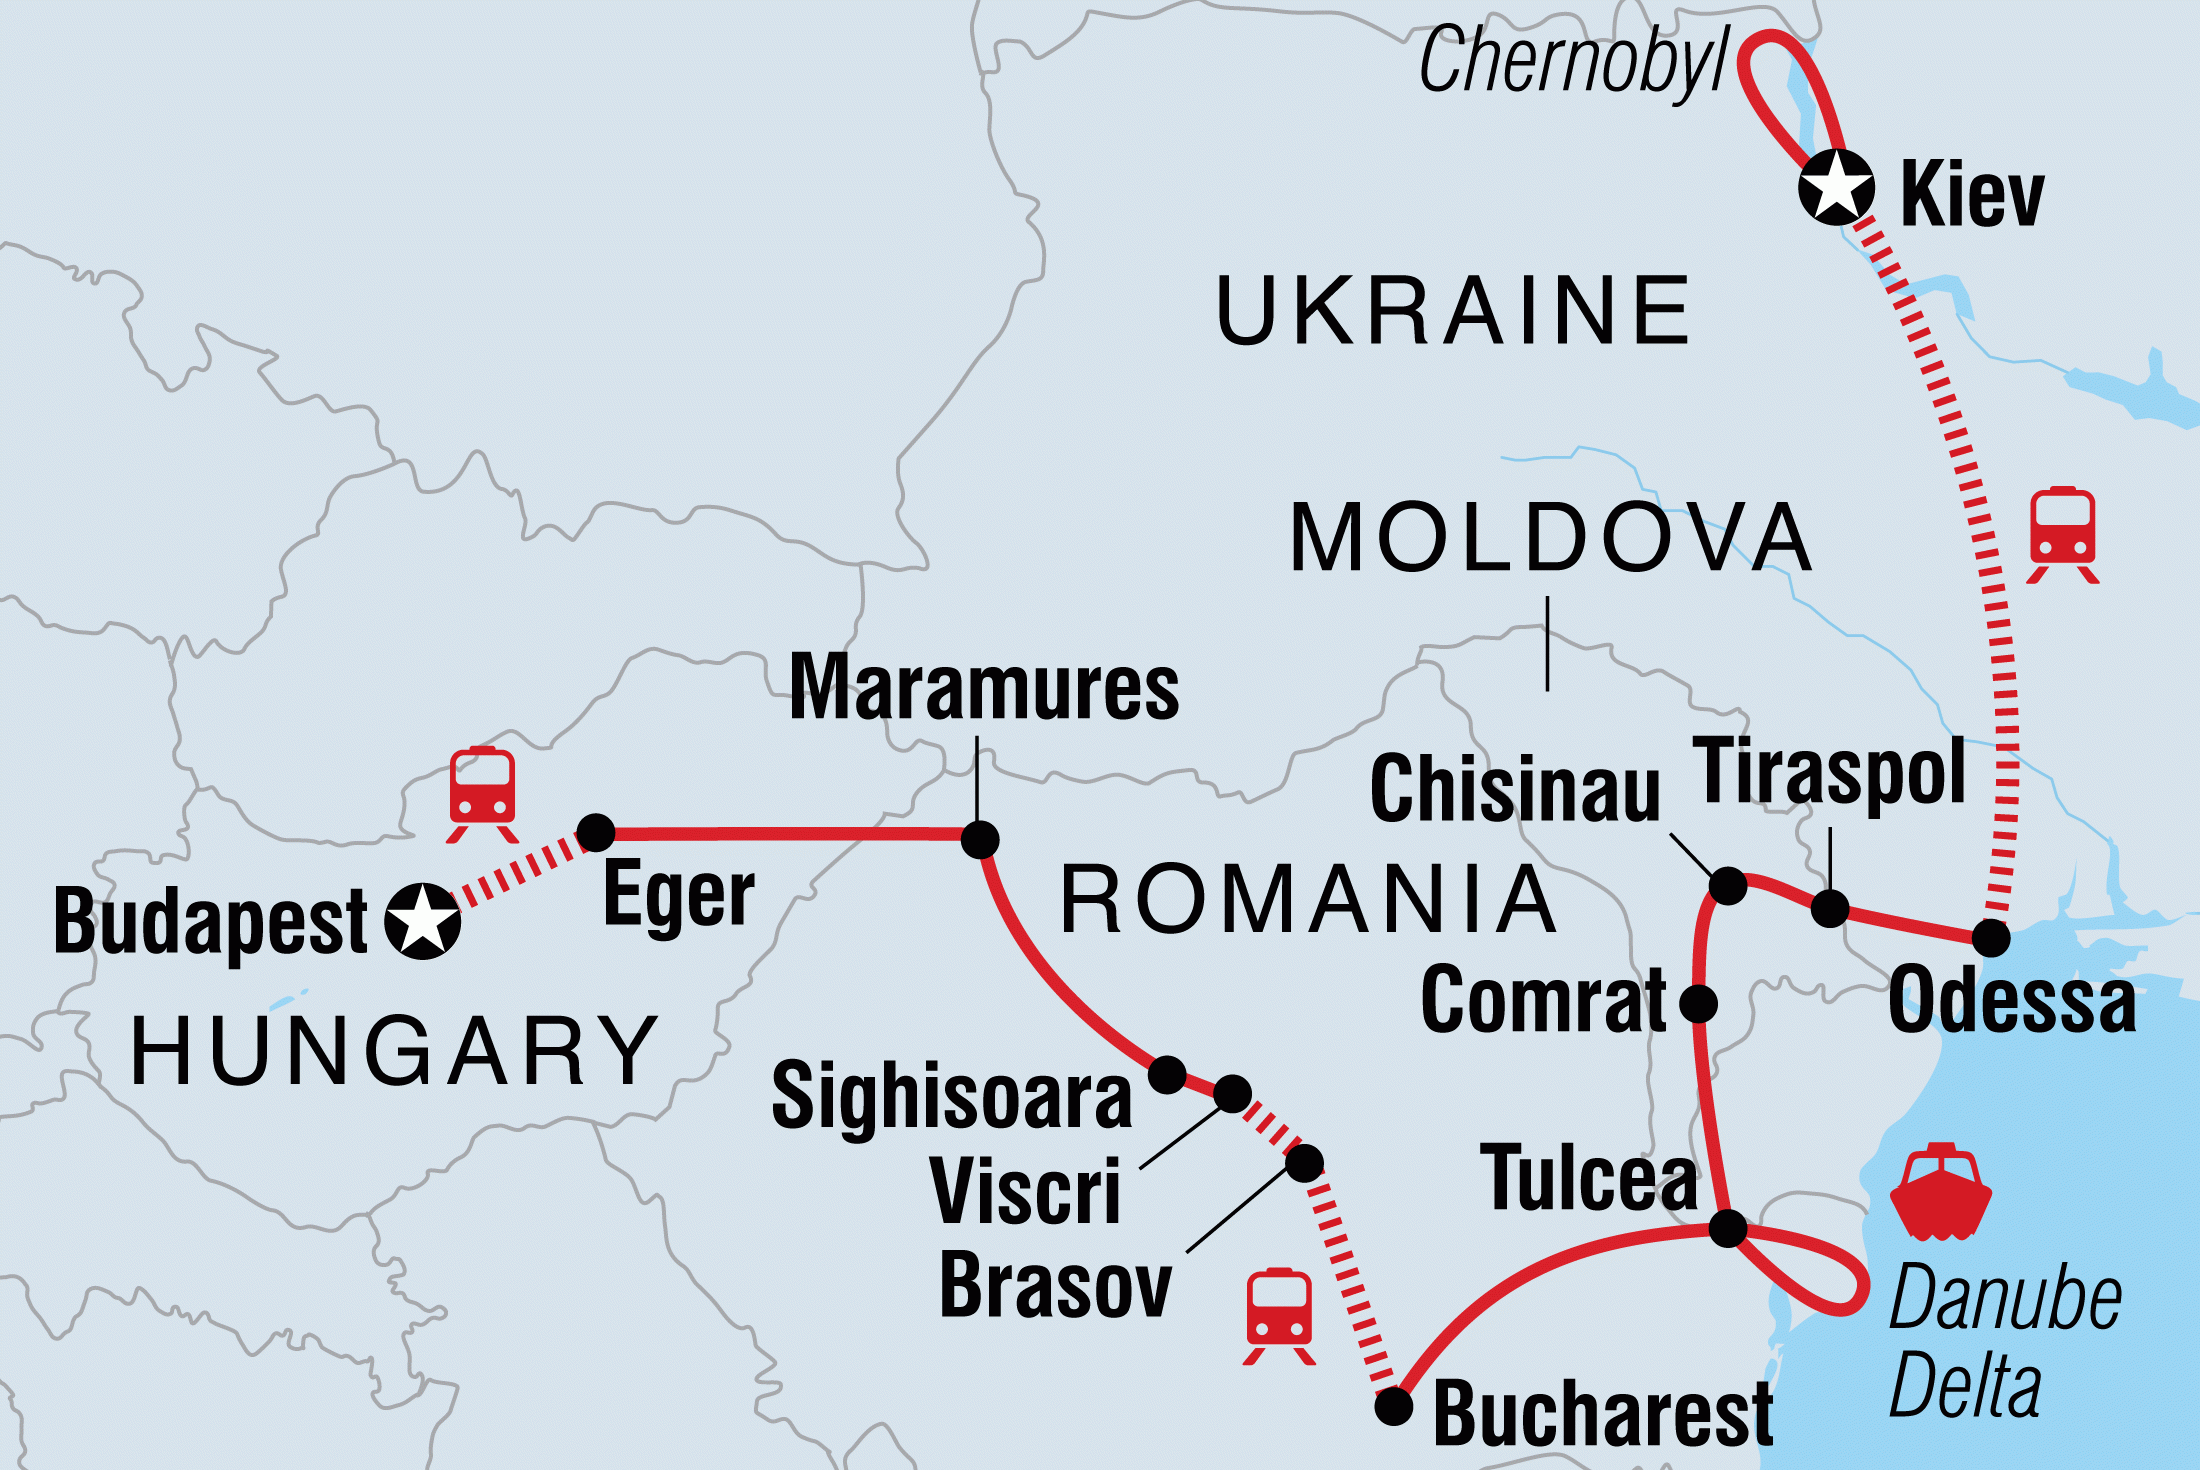 The Route Connecting Romania and Ukraine Will Be Blocked for a Year